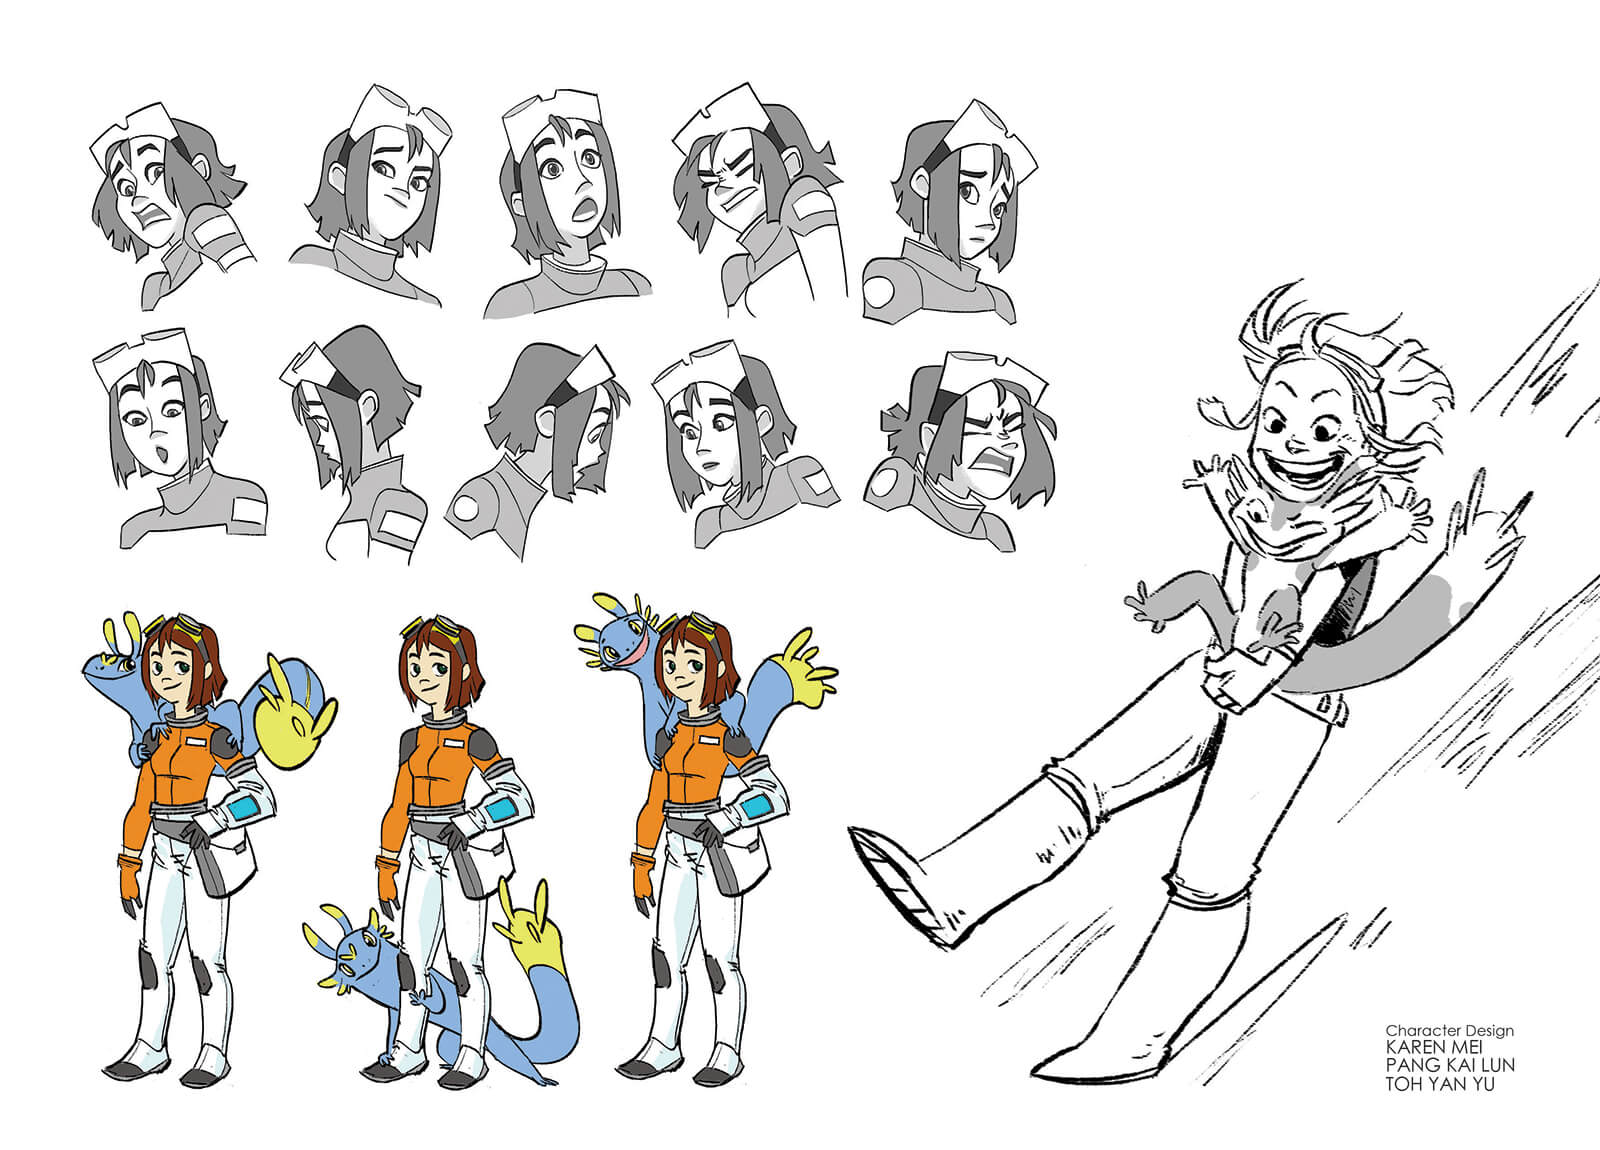 Character design sketches by Karen Mei, Pang Kai Lun, and Toh Yan Yu showing a young astronaut and friendly alien creature.